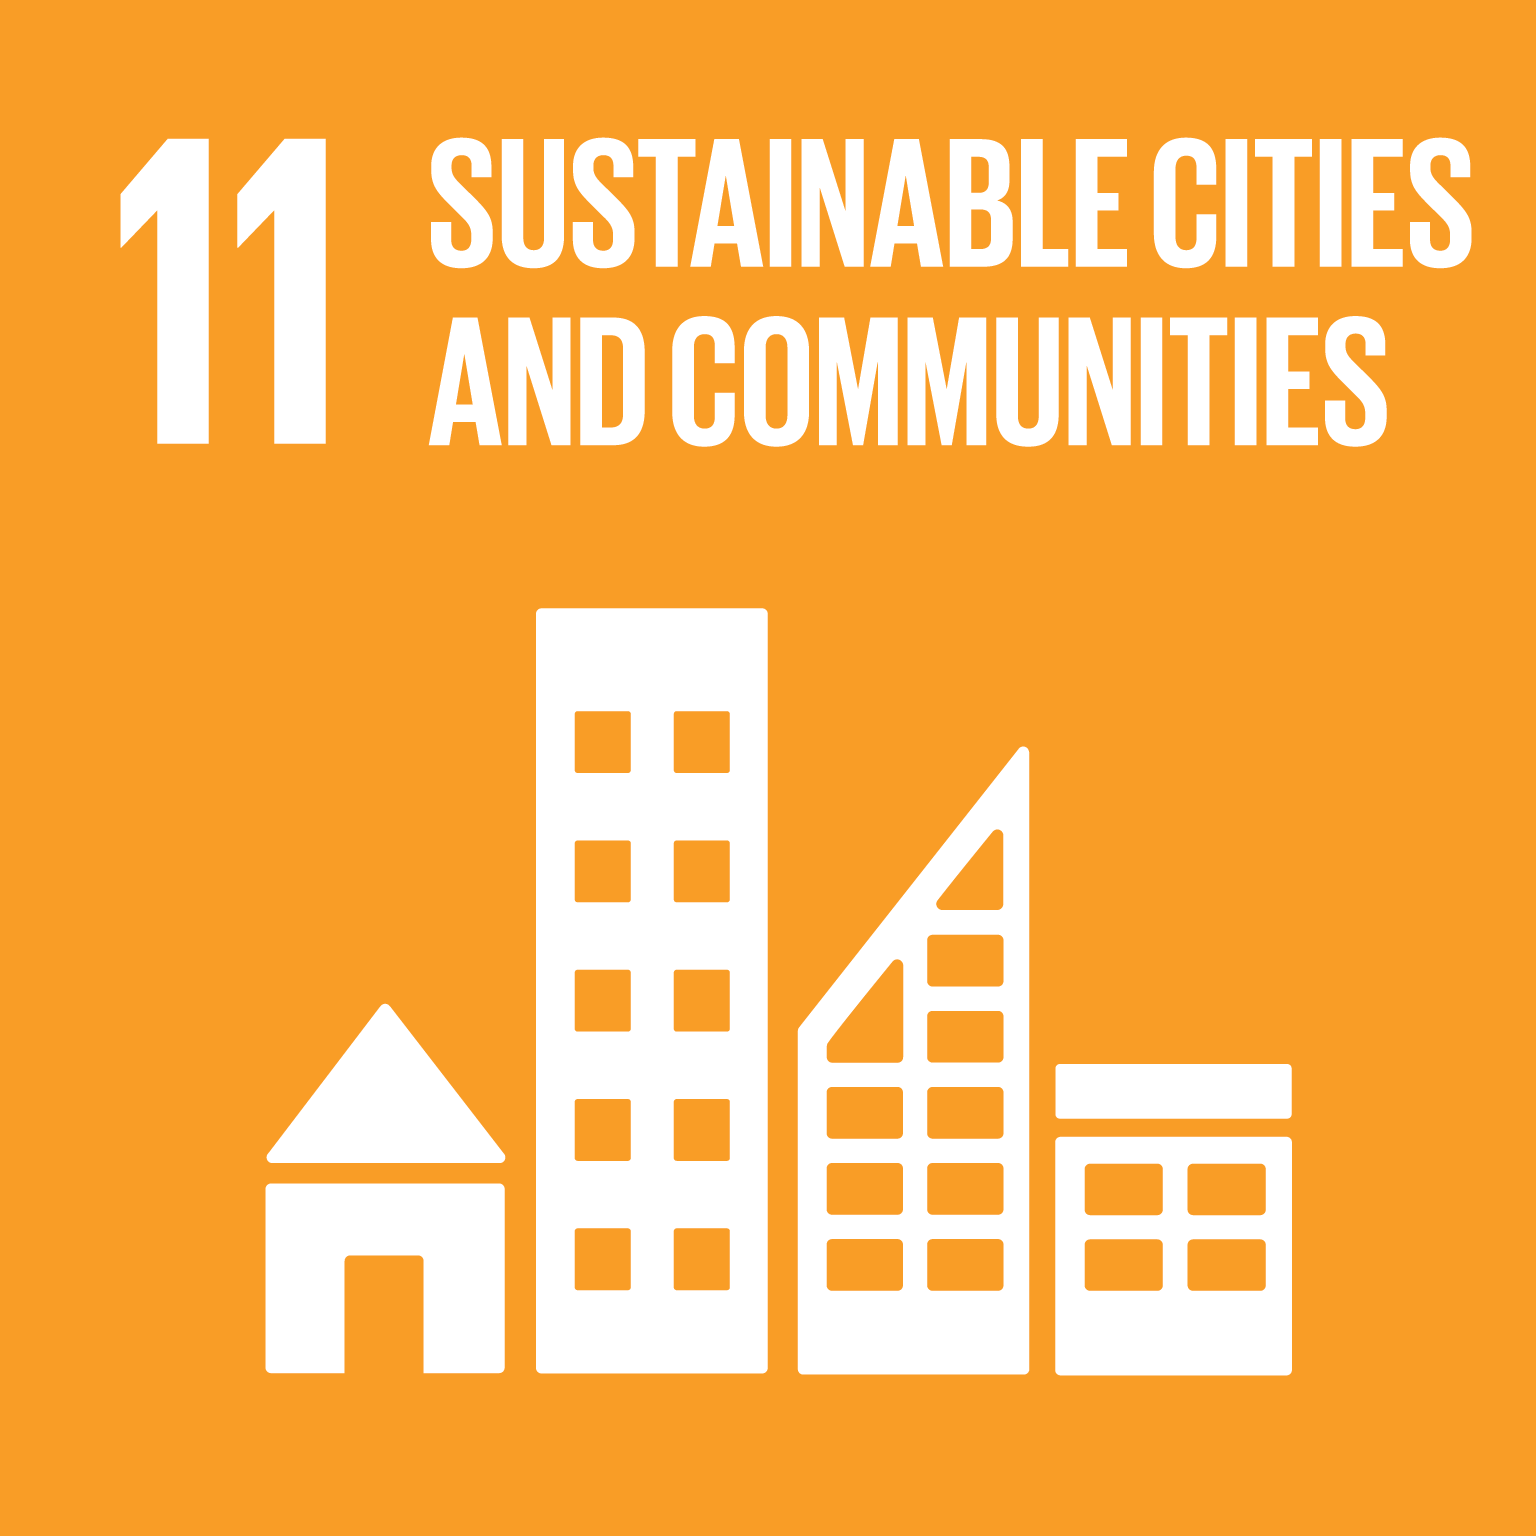 11 - sustainable cities and communities